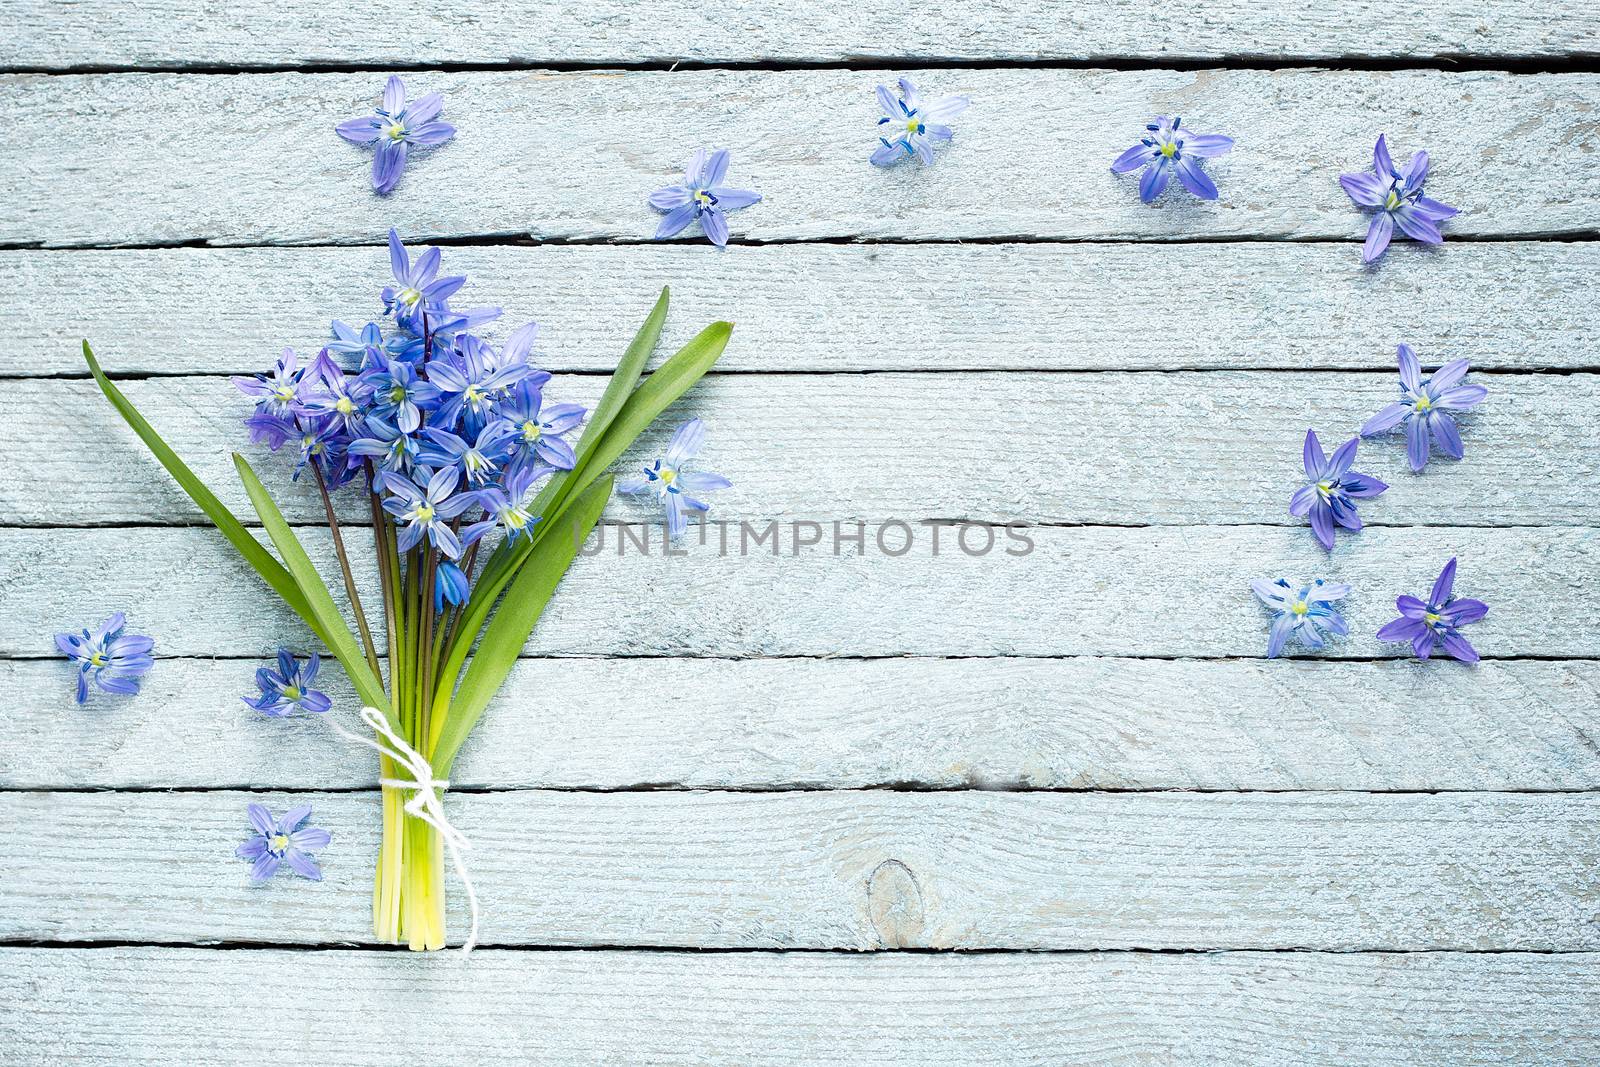 A bouquet of blue flowers on a wooden background, spring flowers on a light wooden background, a bouquet of flowers for the spring holidays